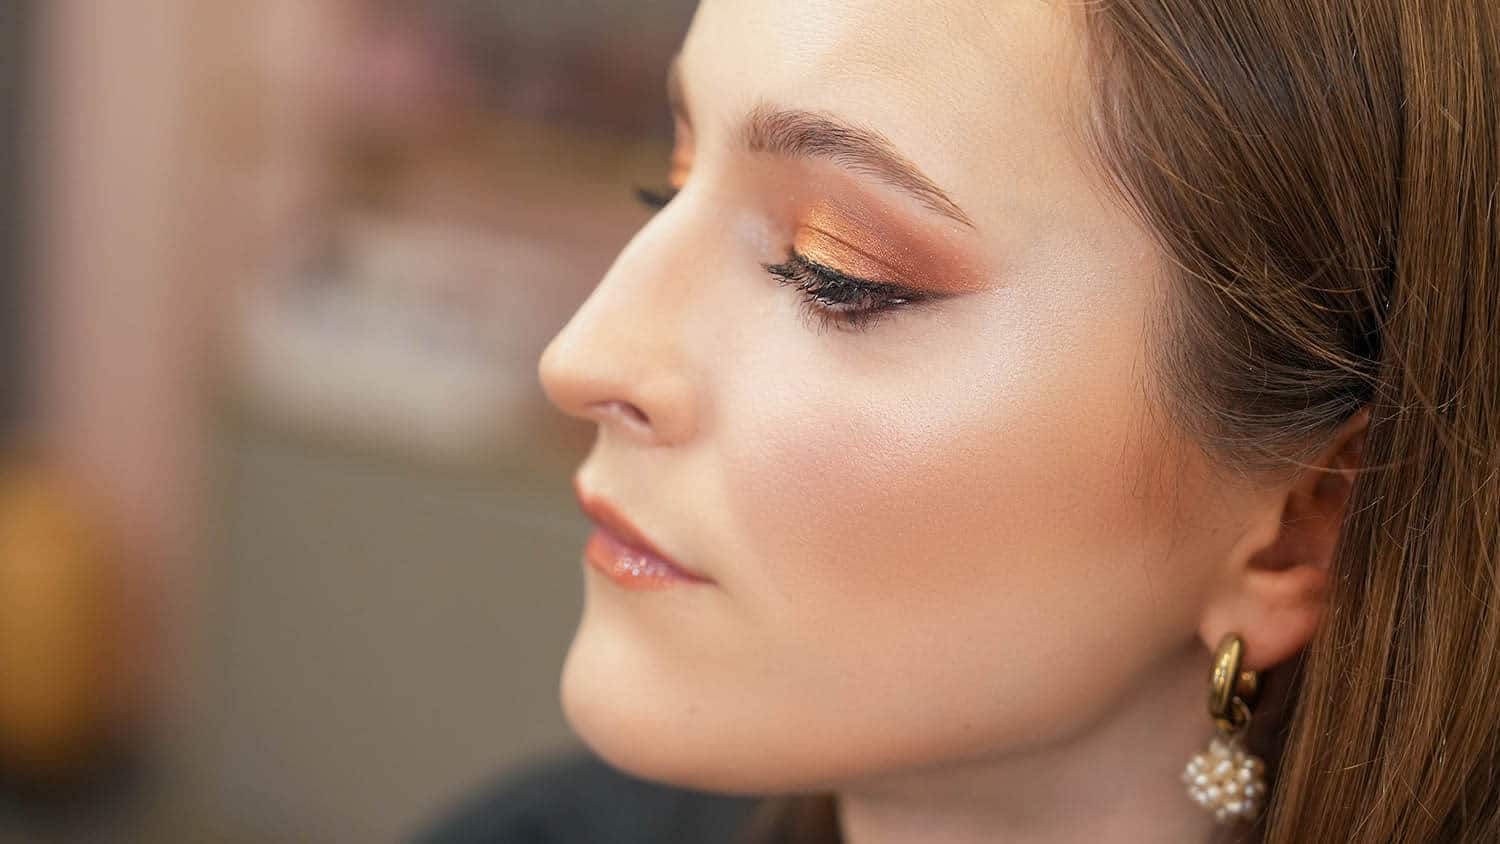 Classic European make-up using nude colors